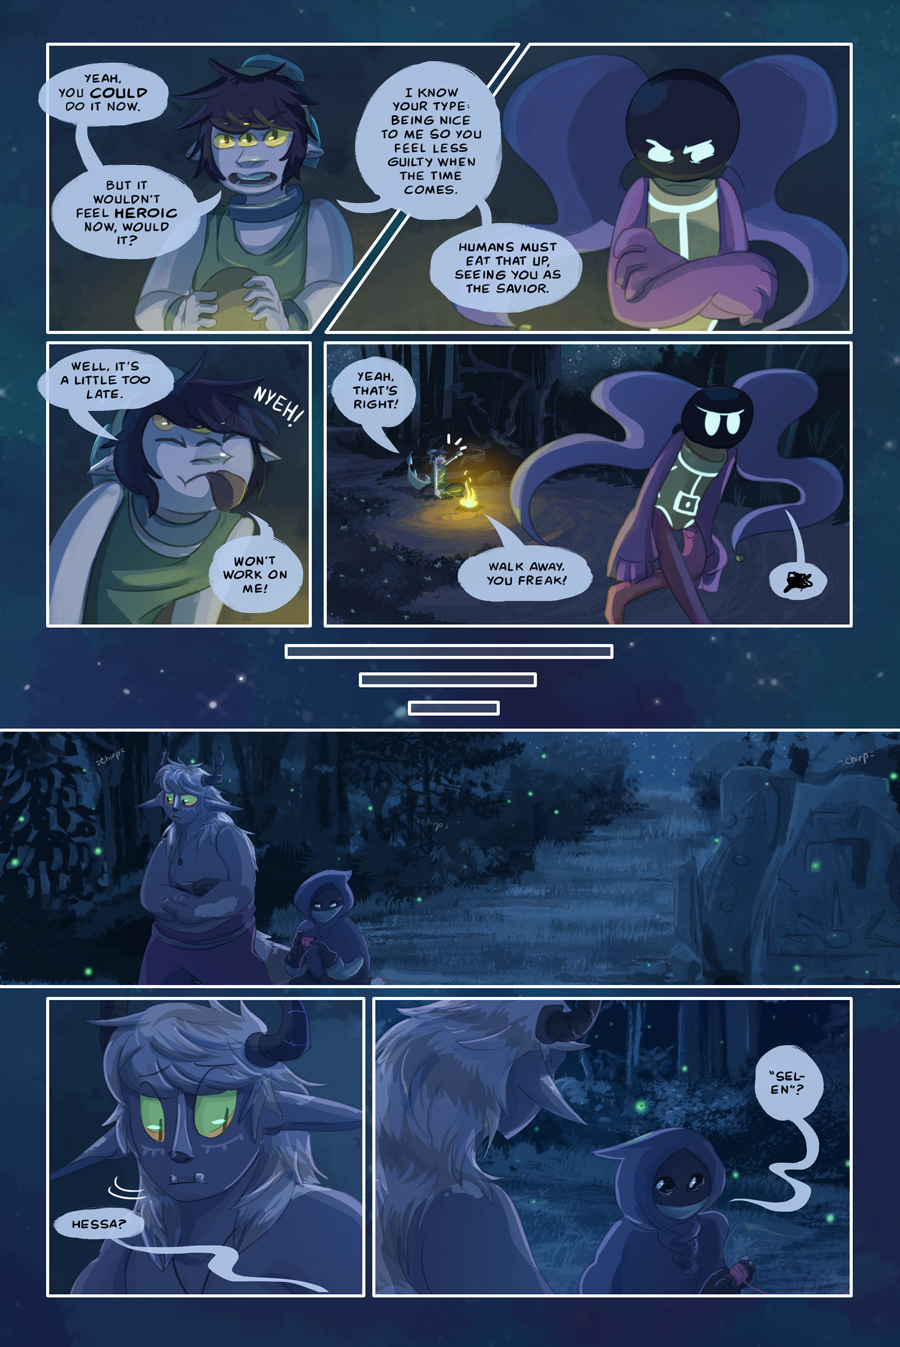 Chapter 6, page 3